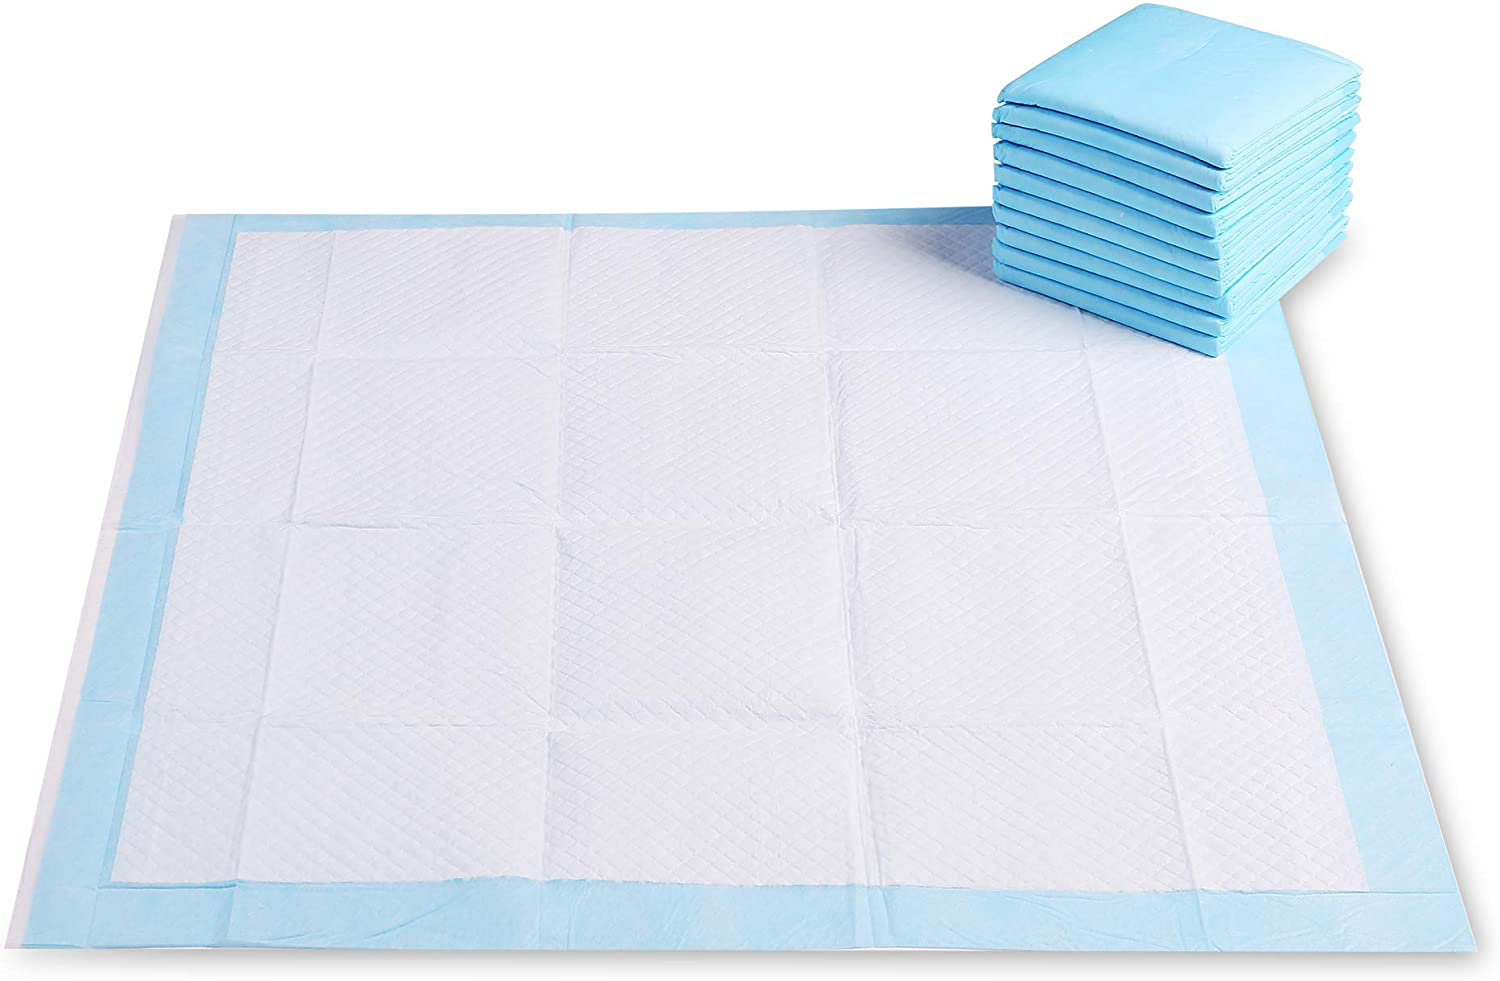 Disposable 50 Counts，Extra Large Dog Pee Pads 18"X23", Super Absorbent ，Leak-Proof 6 Layer and Tear Resistan， Puppy Potty Training Pet Pads,Quick Drying No Leaking Pee Pads for Dogs Cats Rabbits Pets